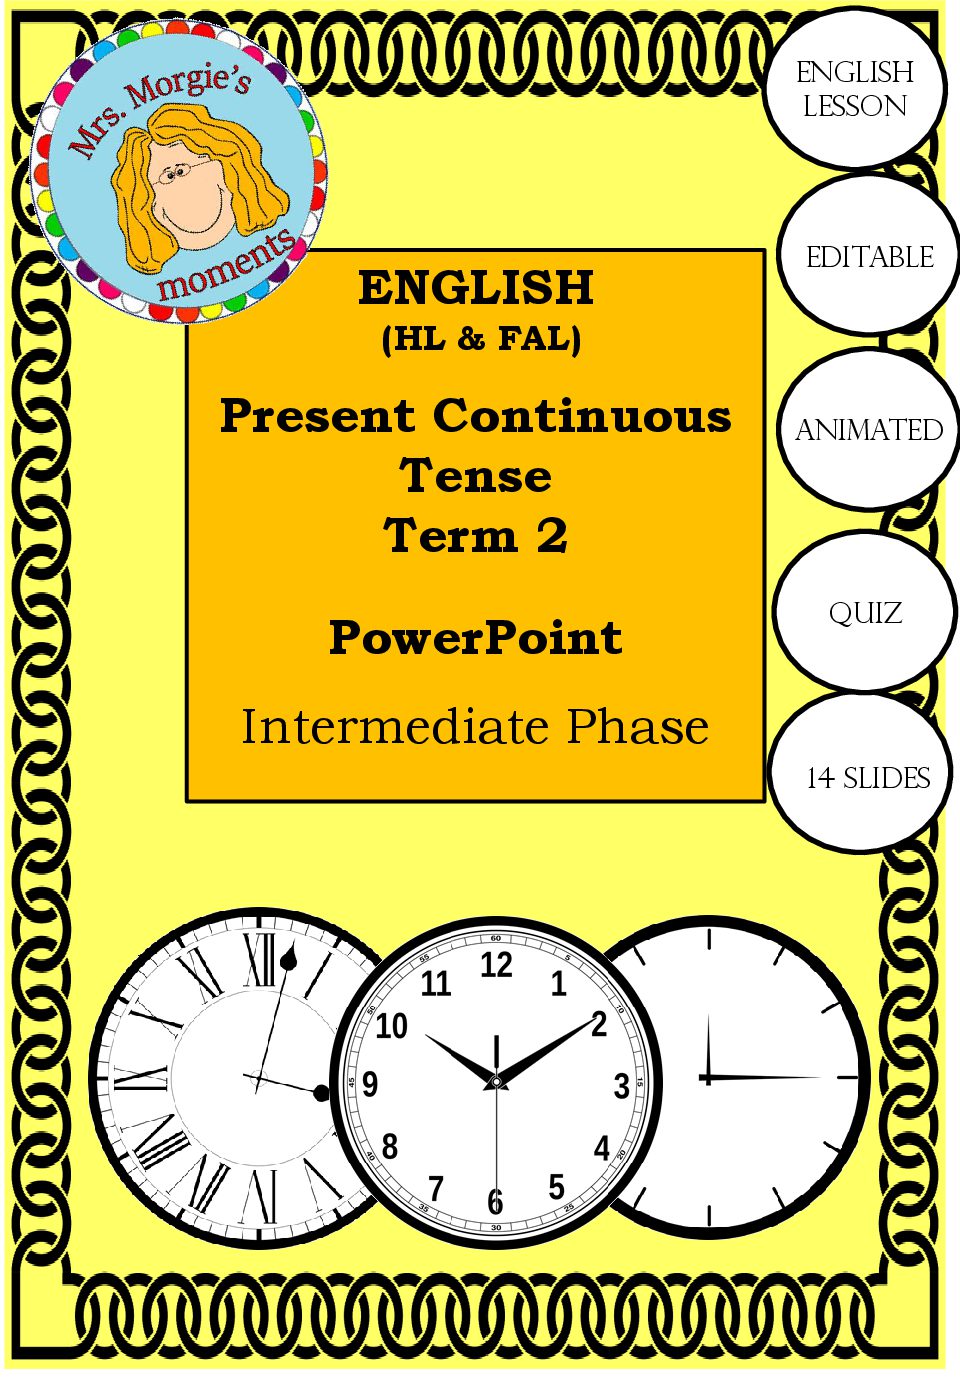 Present continuous tense cover 14 pages